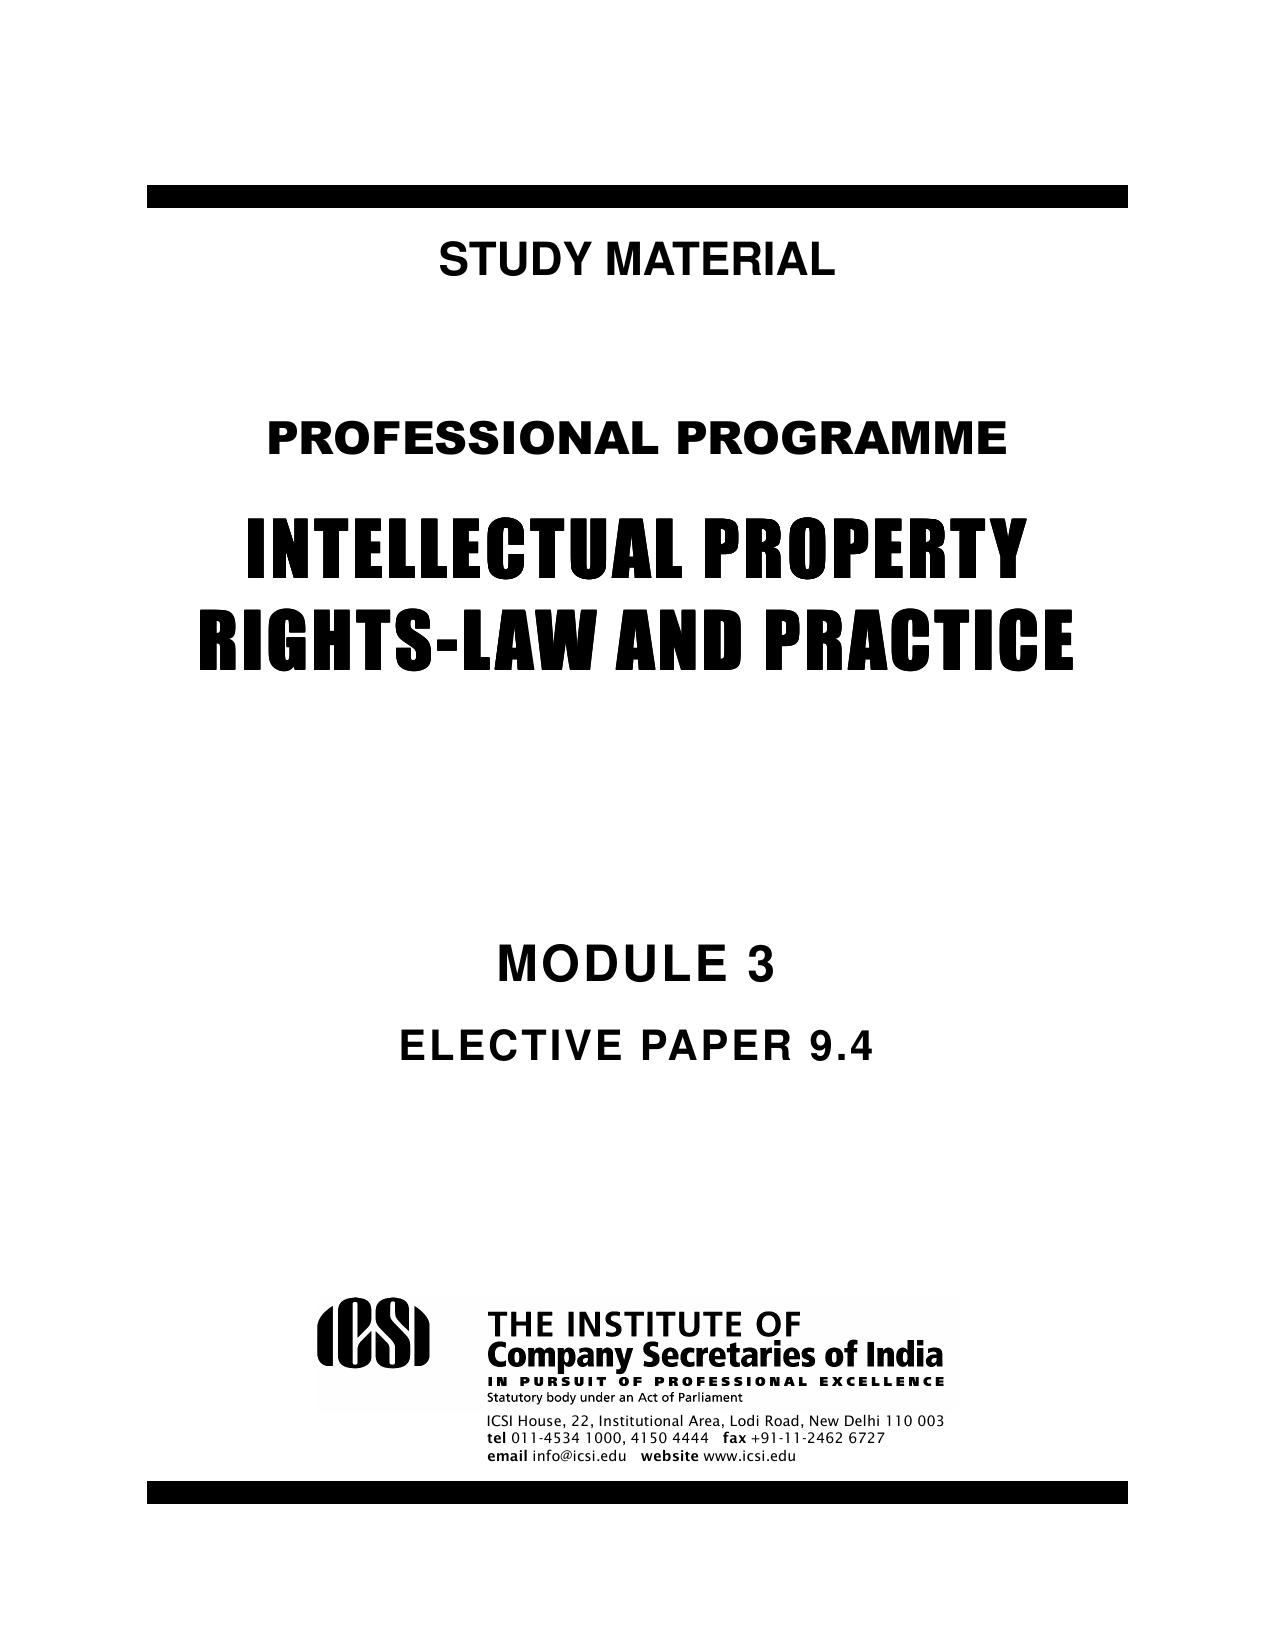 IntellectualPropertyRightLaws&Practice 2015